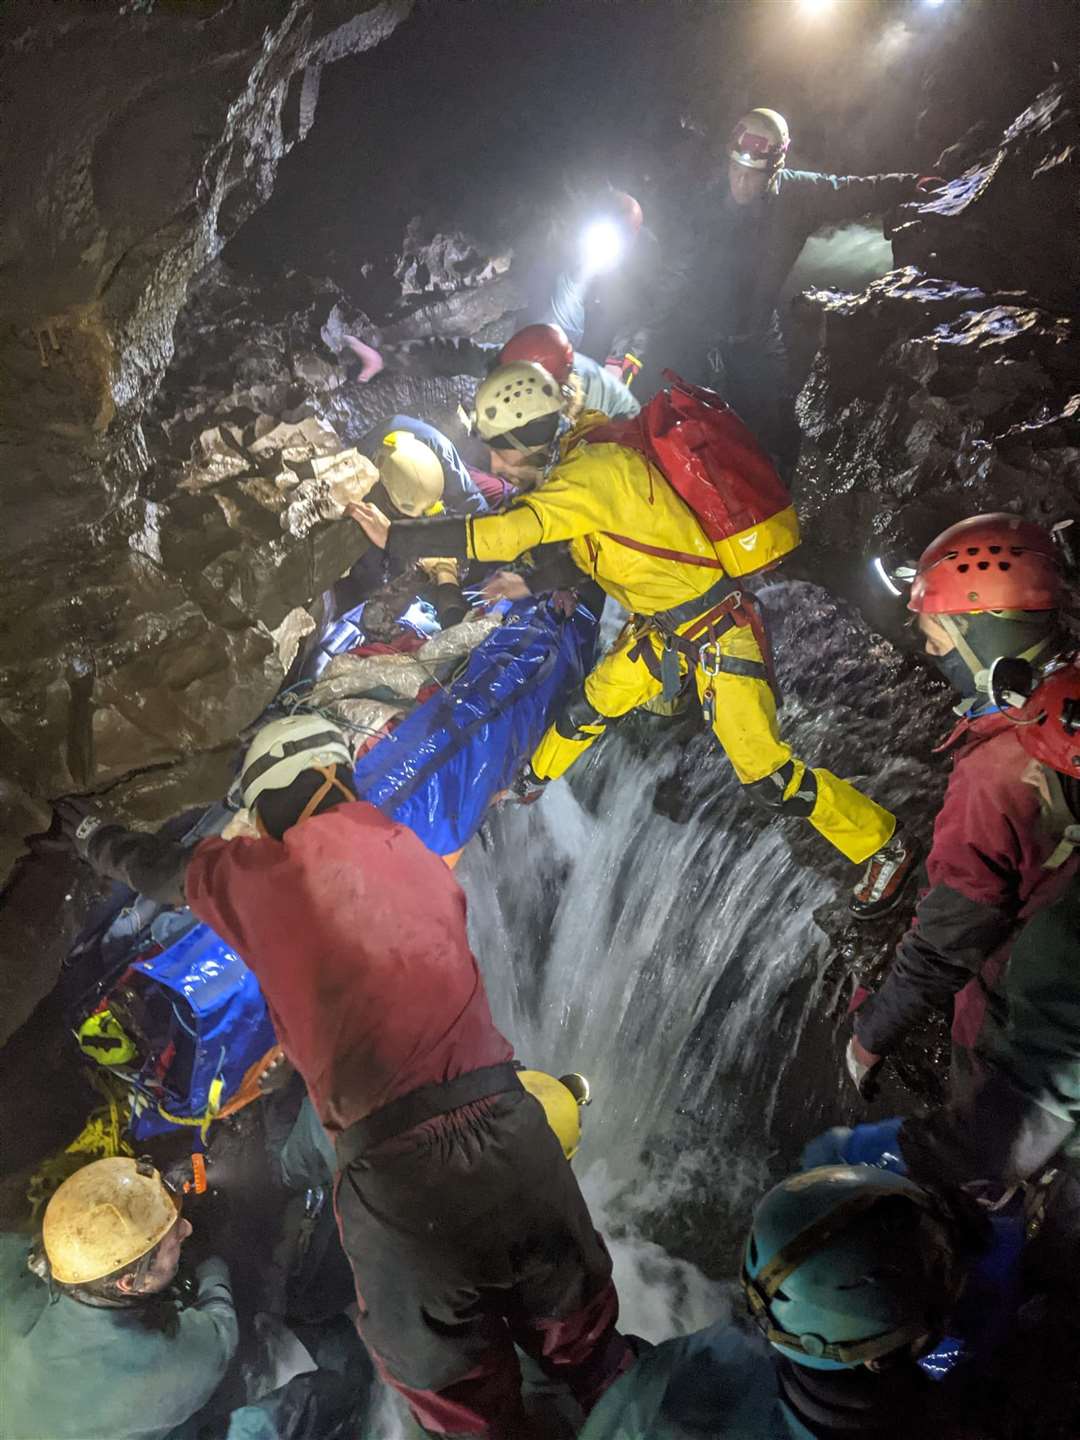 The rescue team carrying Mr Linnane on a stretcher through a cave (South & Mid Wales Cave Rescue Team)